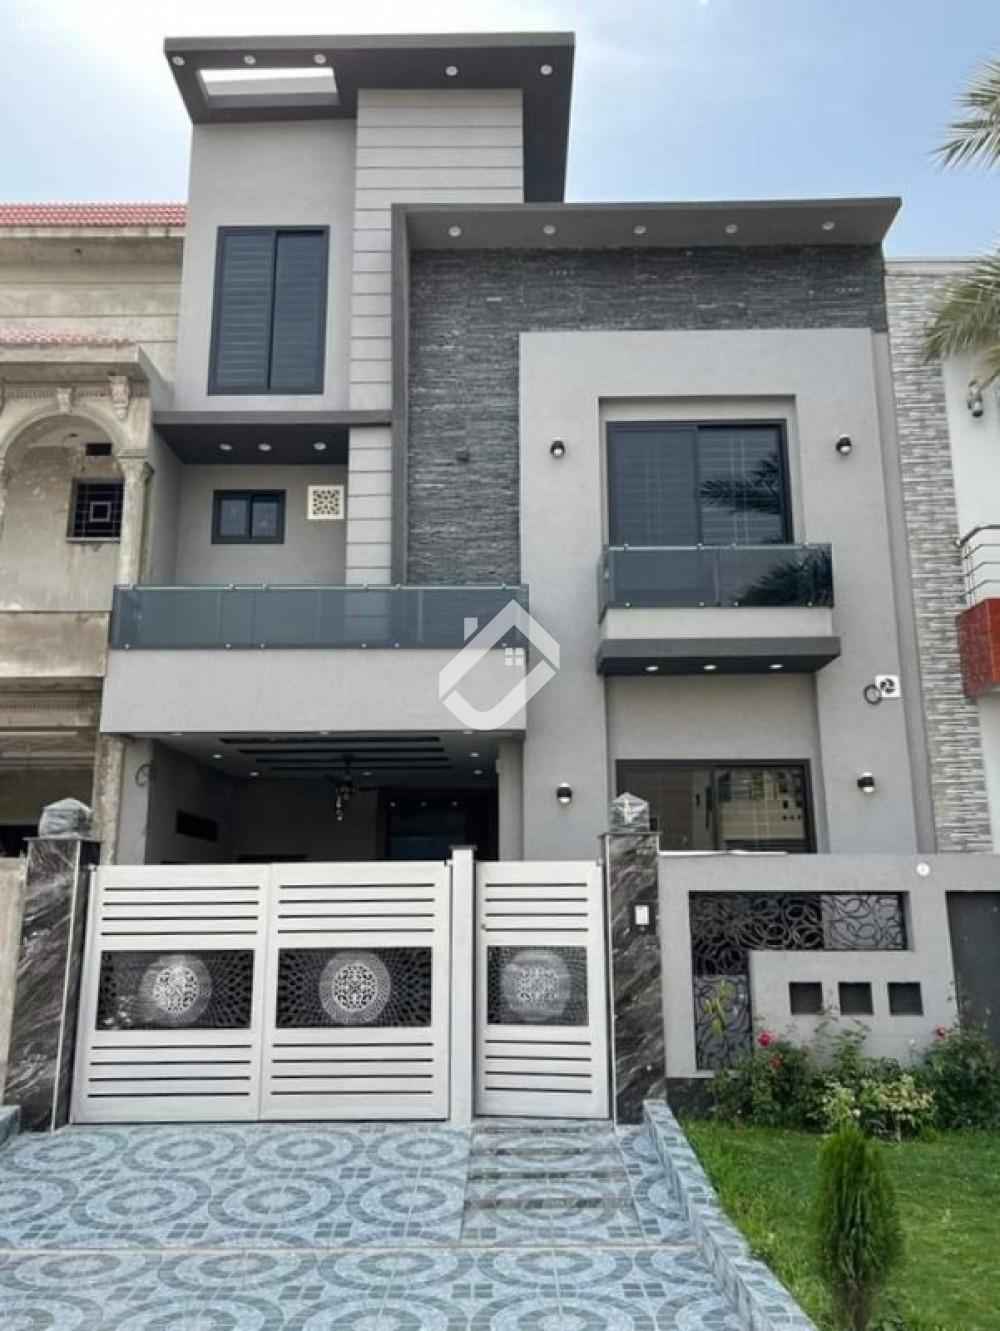 Main image 5 Marla Double Storey House For Sale In Citi Housing Phase 1 Citi Housing Phase 1, Gujranwala